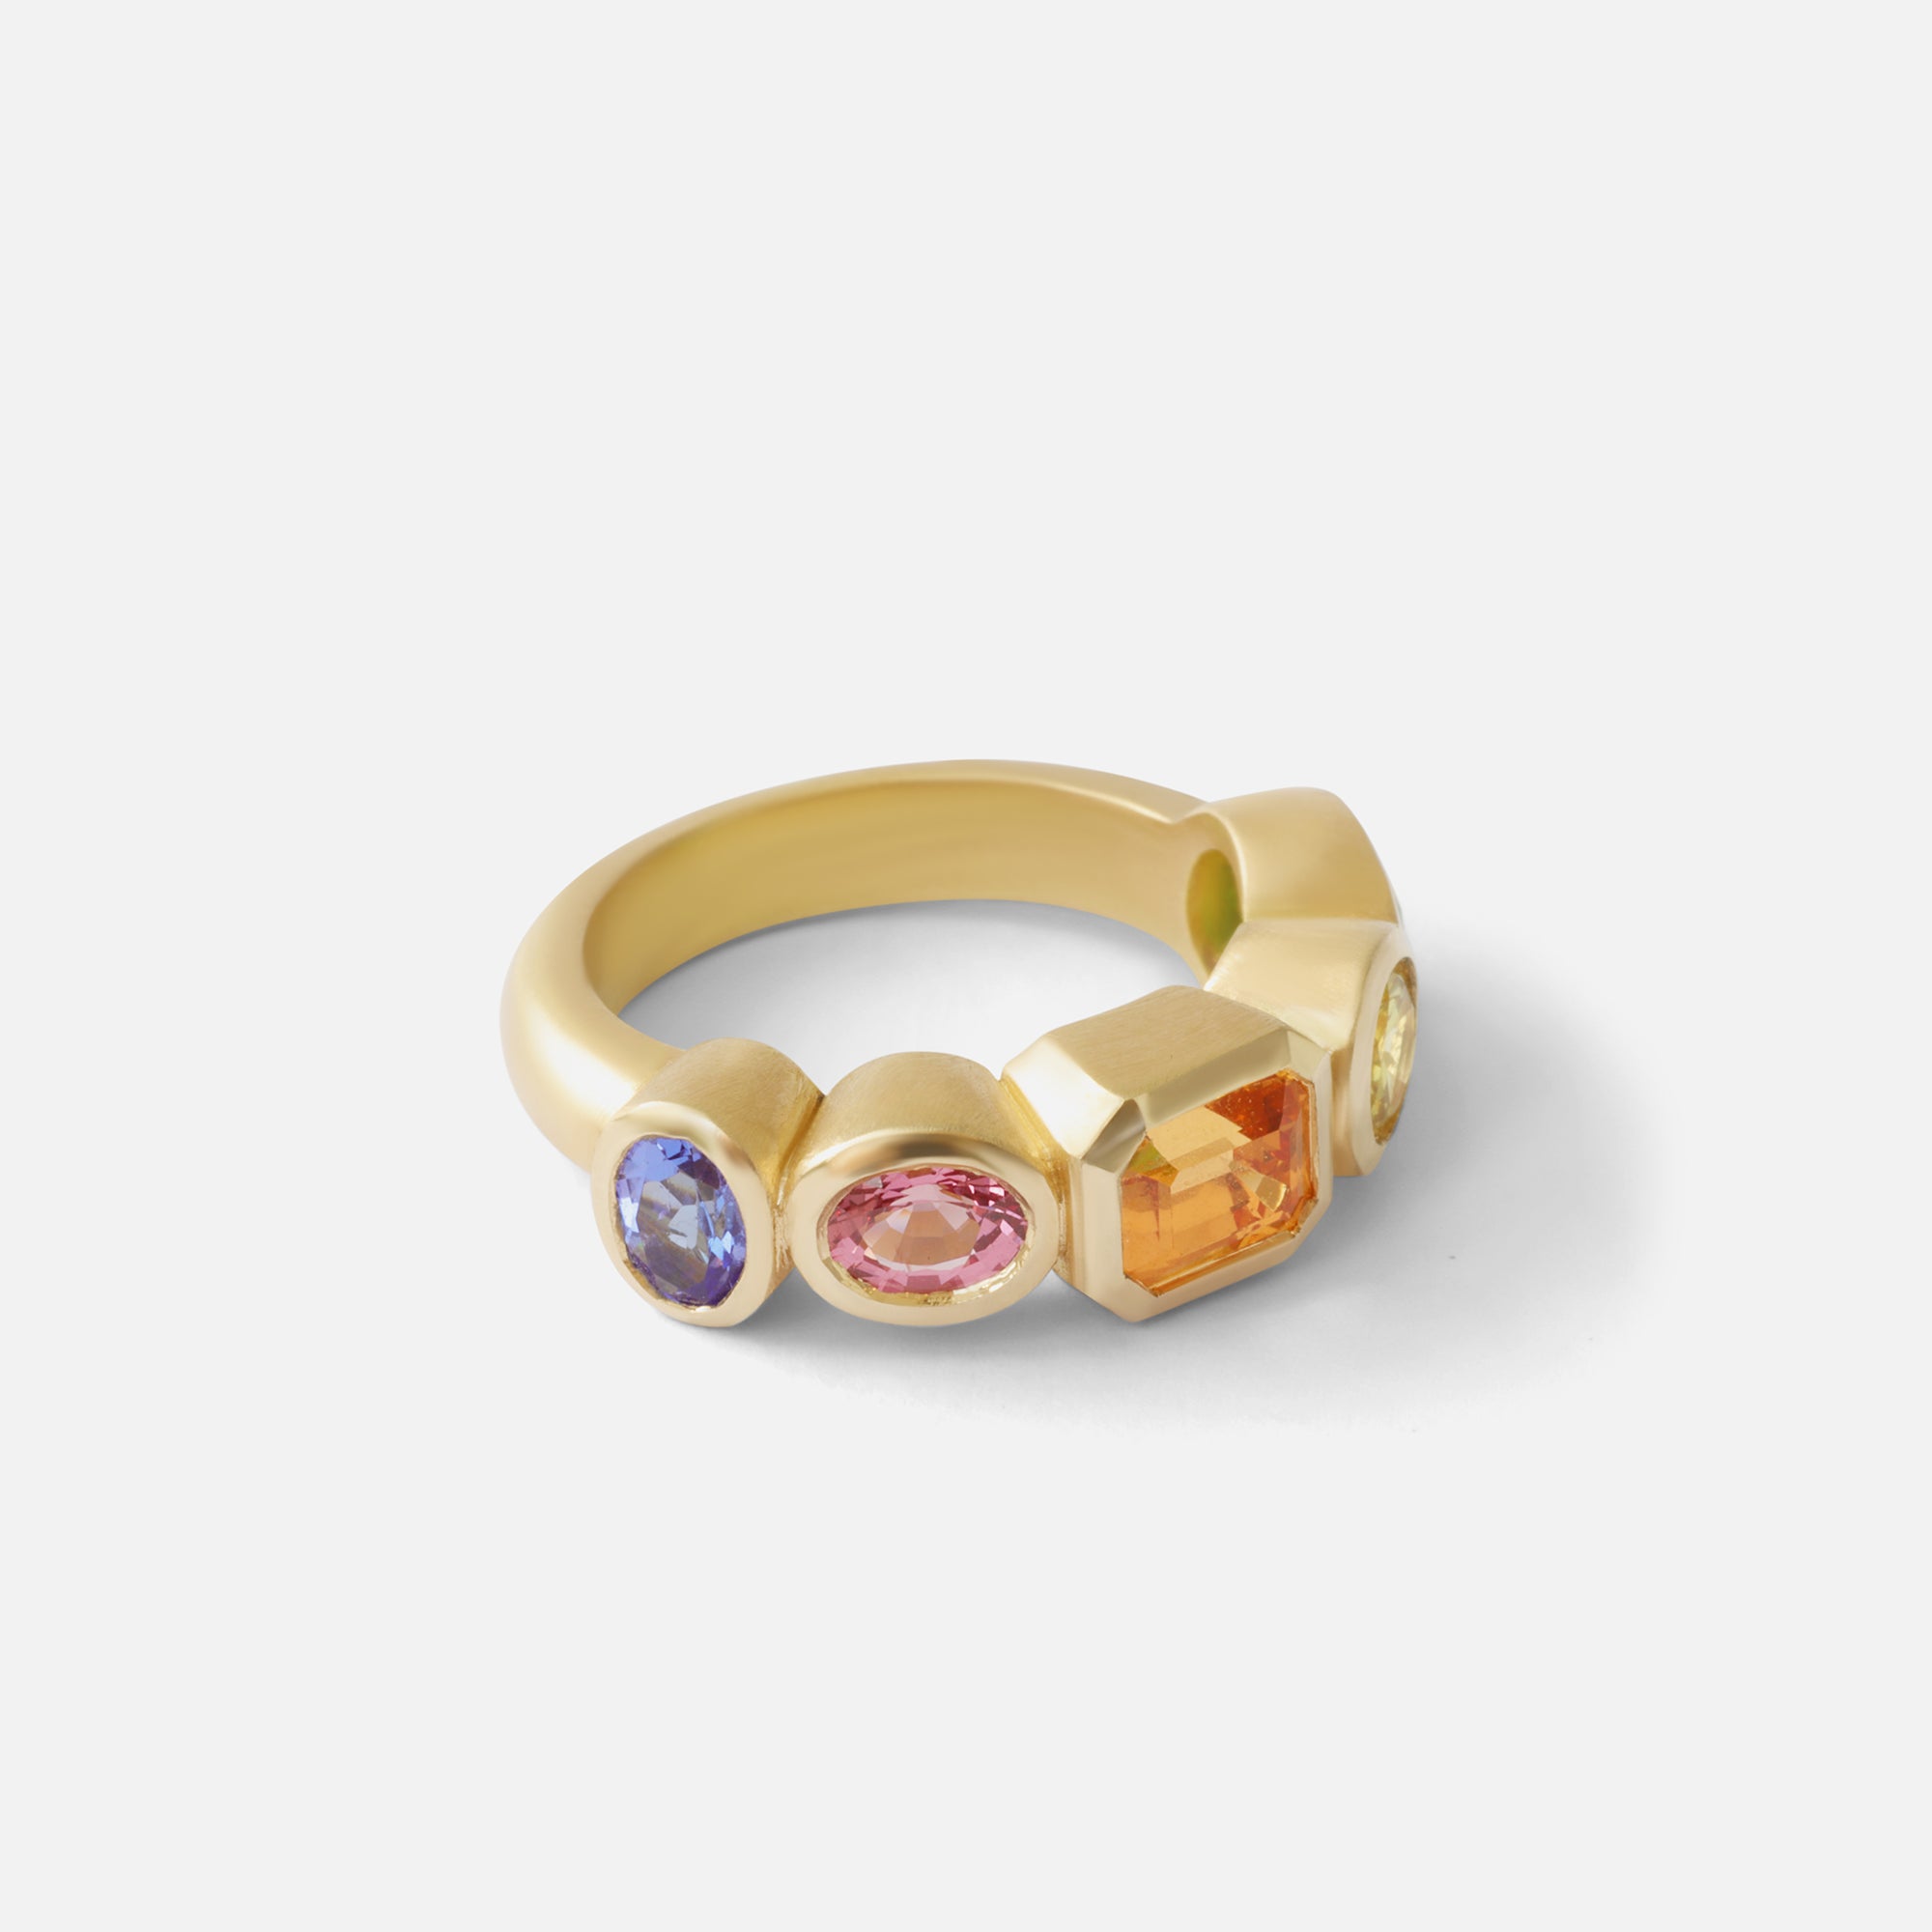 5 Stone Candy Ring By Bree Altman in WEDDING Category